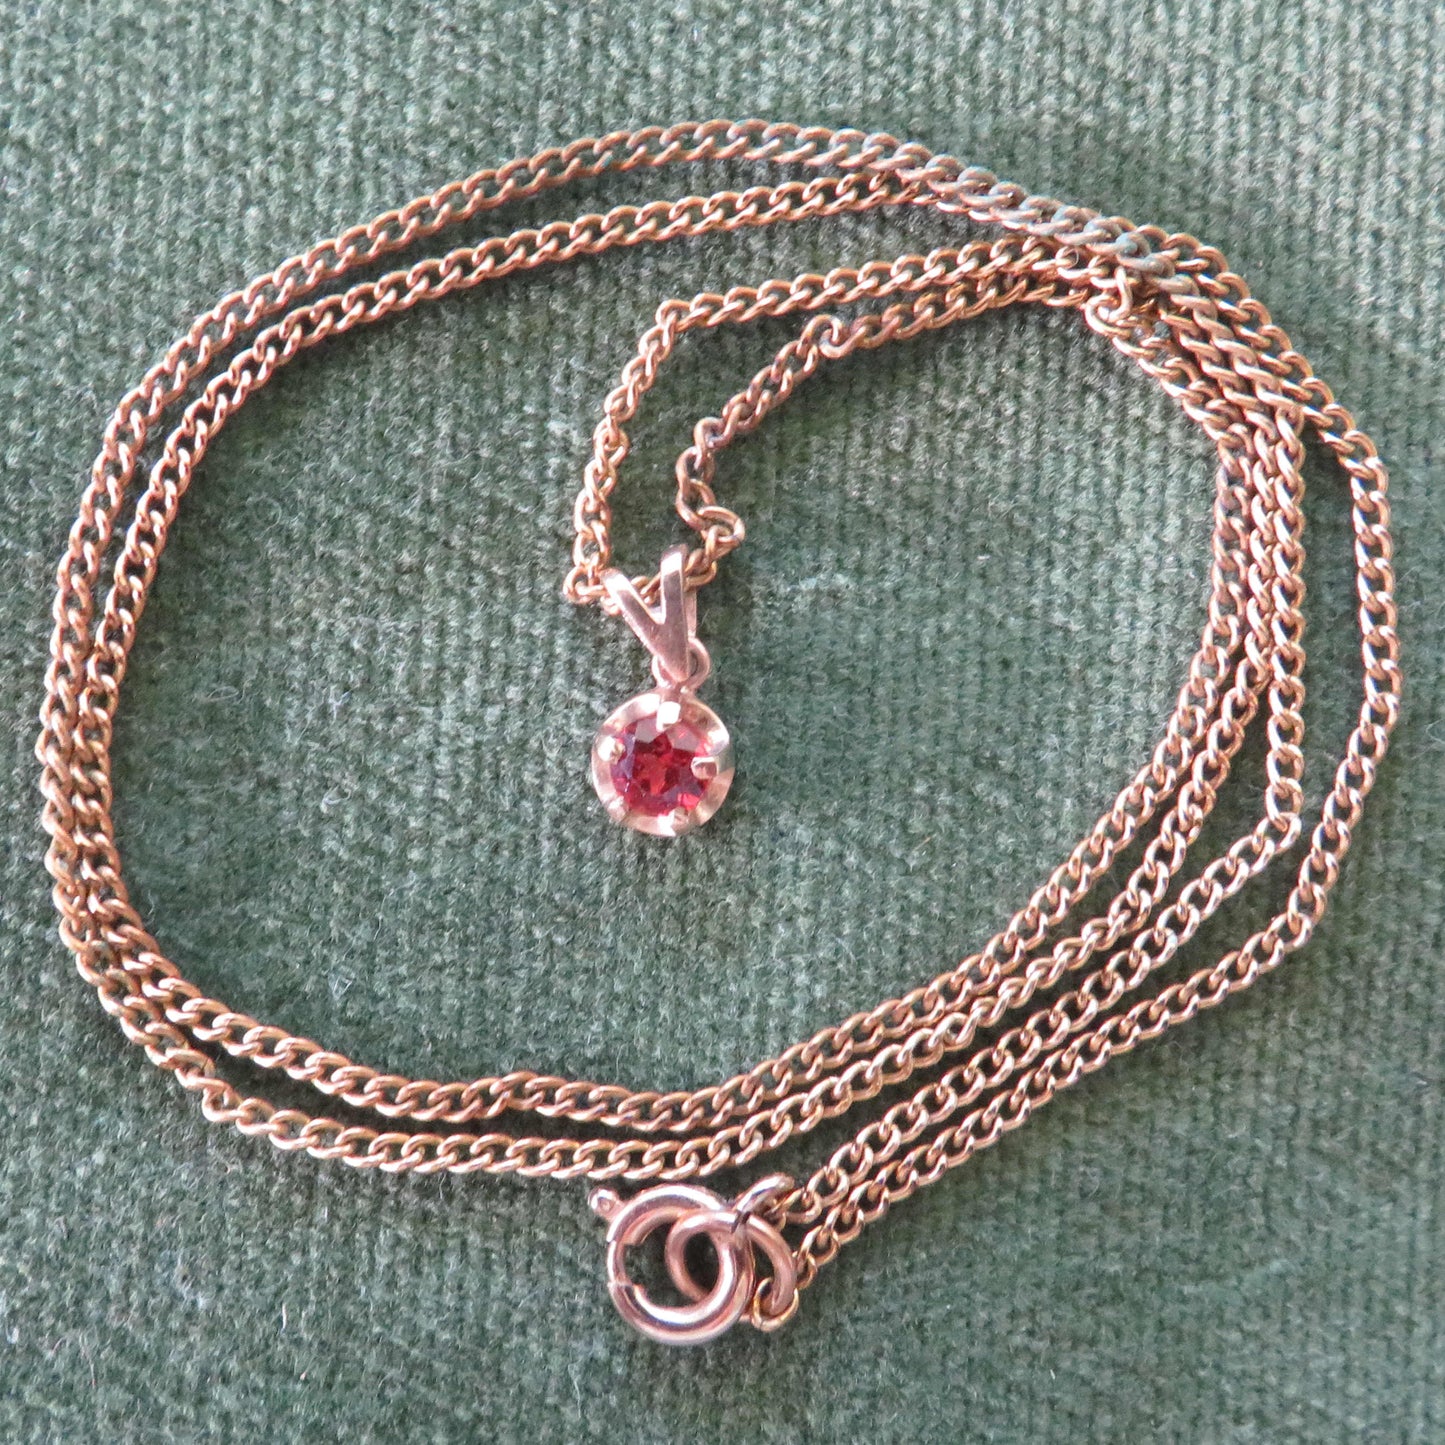 9ct Gold Garnet Pendant With A Plated Chain